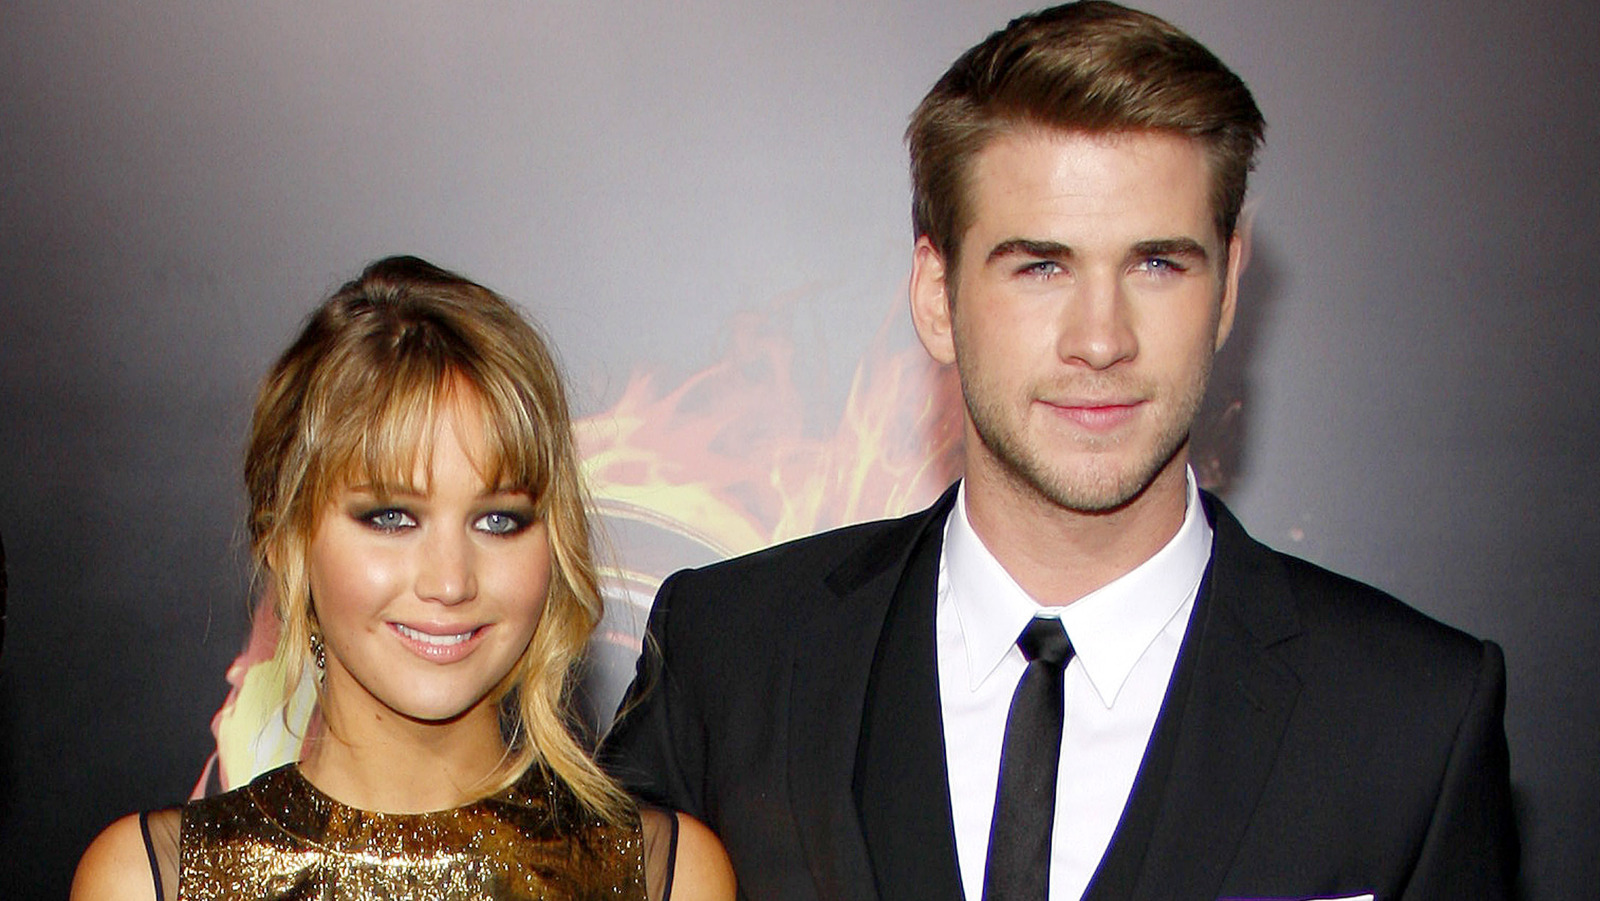 Did Liam Hemsworth Have A Fling With Hunger Games Co-Star Jennifer Lawrence? – Nicki Swift